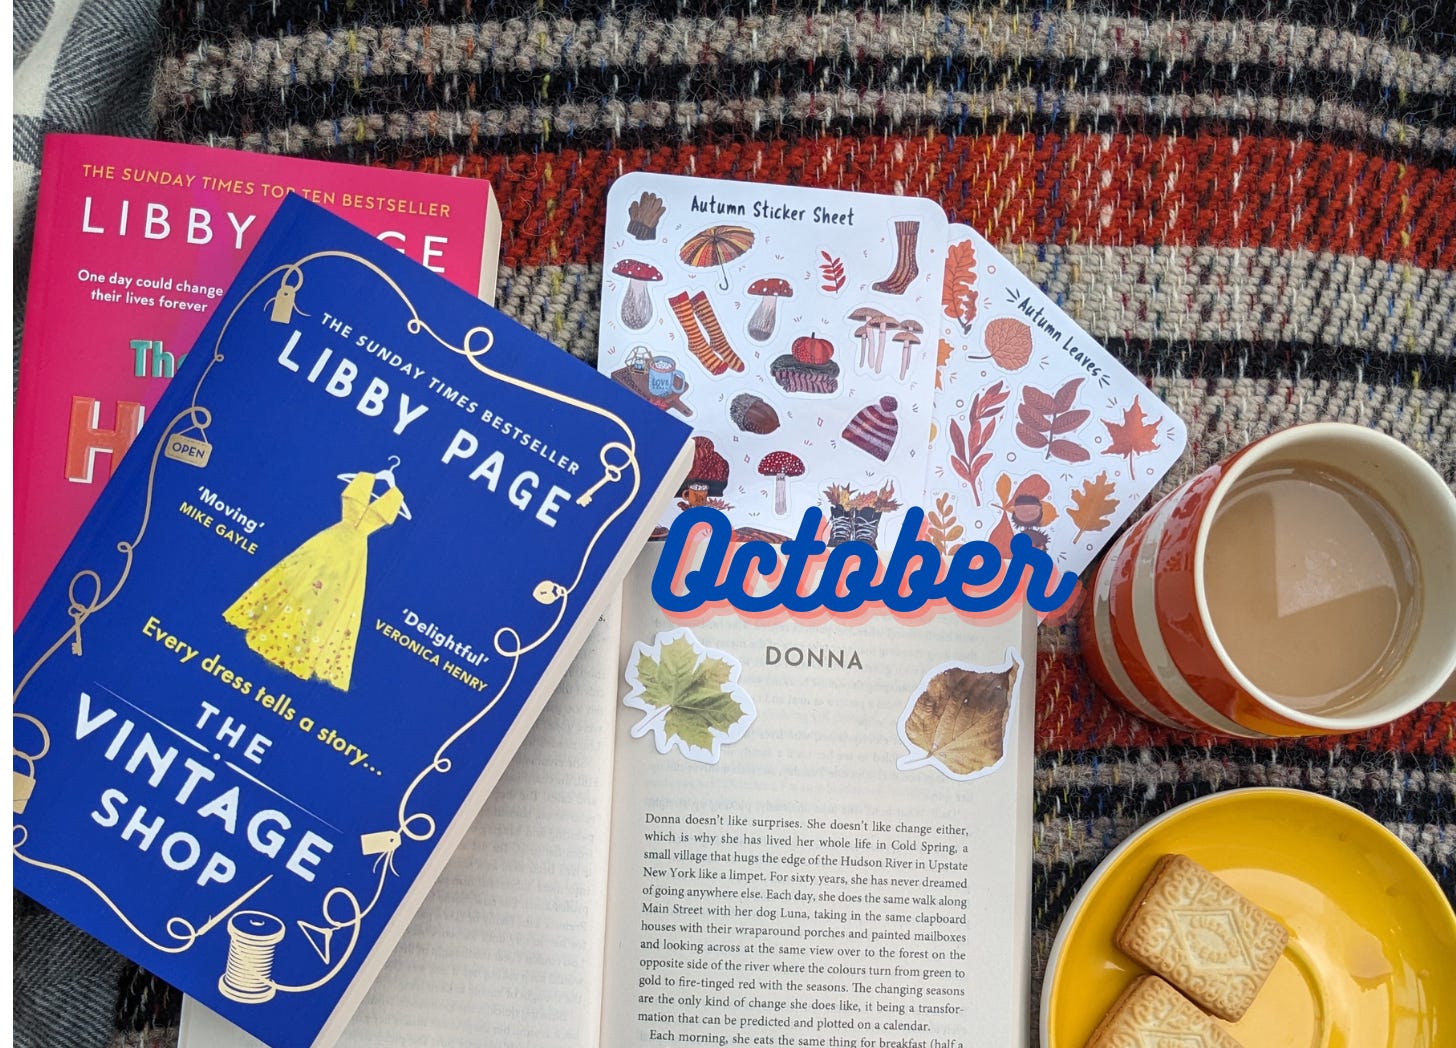 A pile of books including The Vintage Shop, on an autumnal blanket with a cup of tea, biscuits and some autumnal stickers.